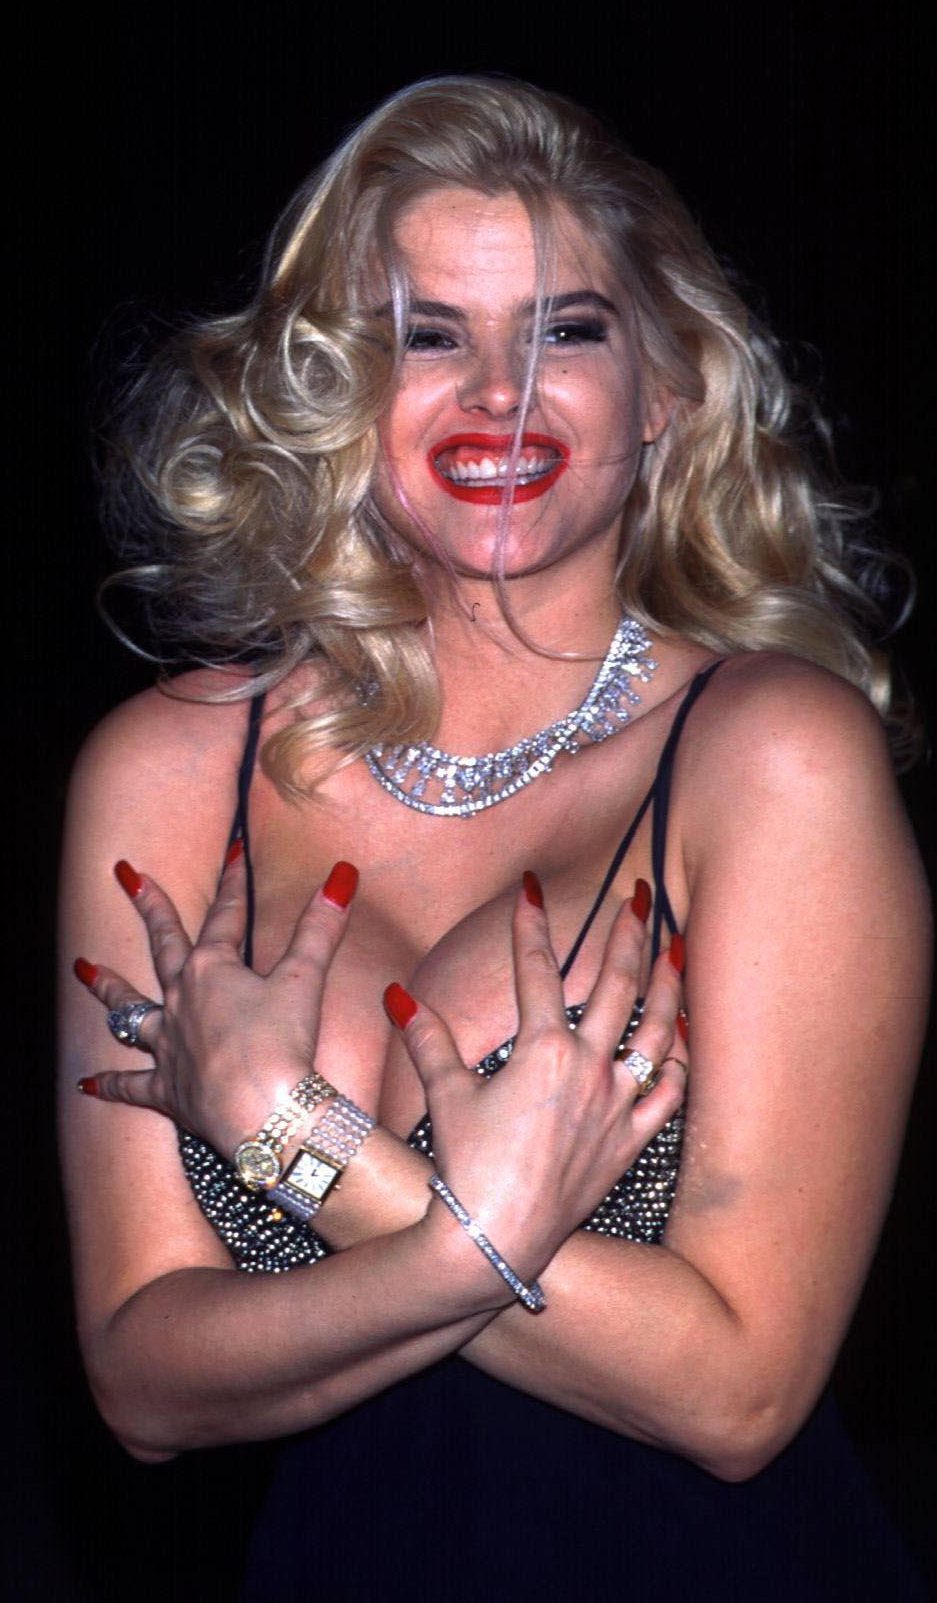 brittany biddy recommends Anna Nicole Smith Nails